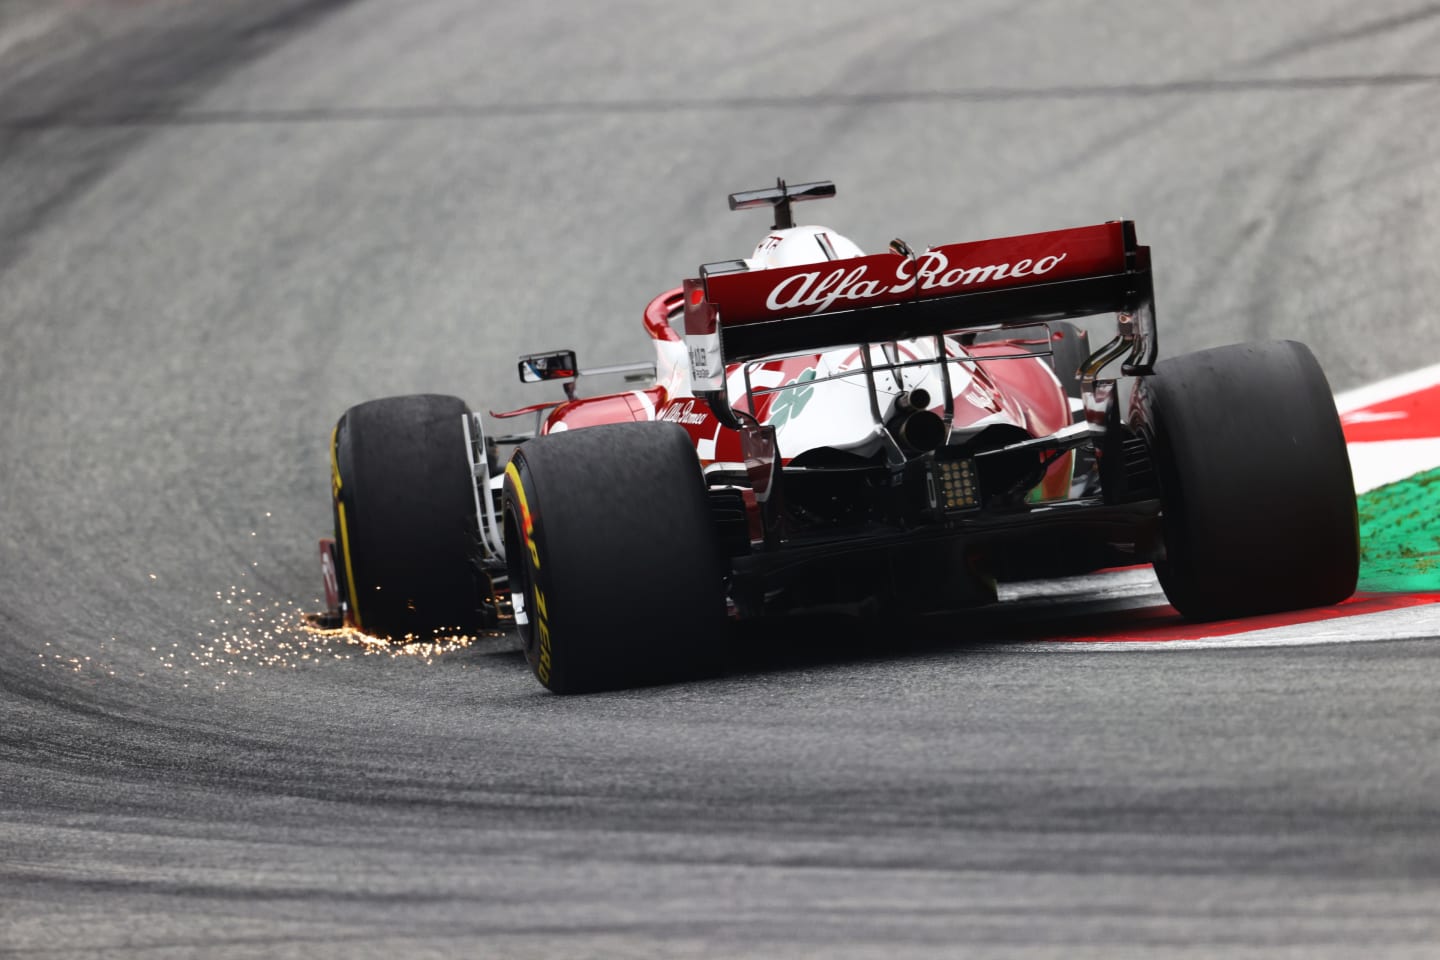 SPIELBERG, AUSTRIA - JULY 02: Kimi Raikkonen of Finland driving the (7) Alfa Romeo Racing C41 Ferrari during practice ahead of the F1 Grand Prix of Austria at Red Bull Ring on July 02, 2021 in Spielberg, Austria. (Photo by Clive Rose/Getty Images)